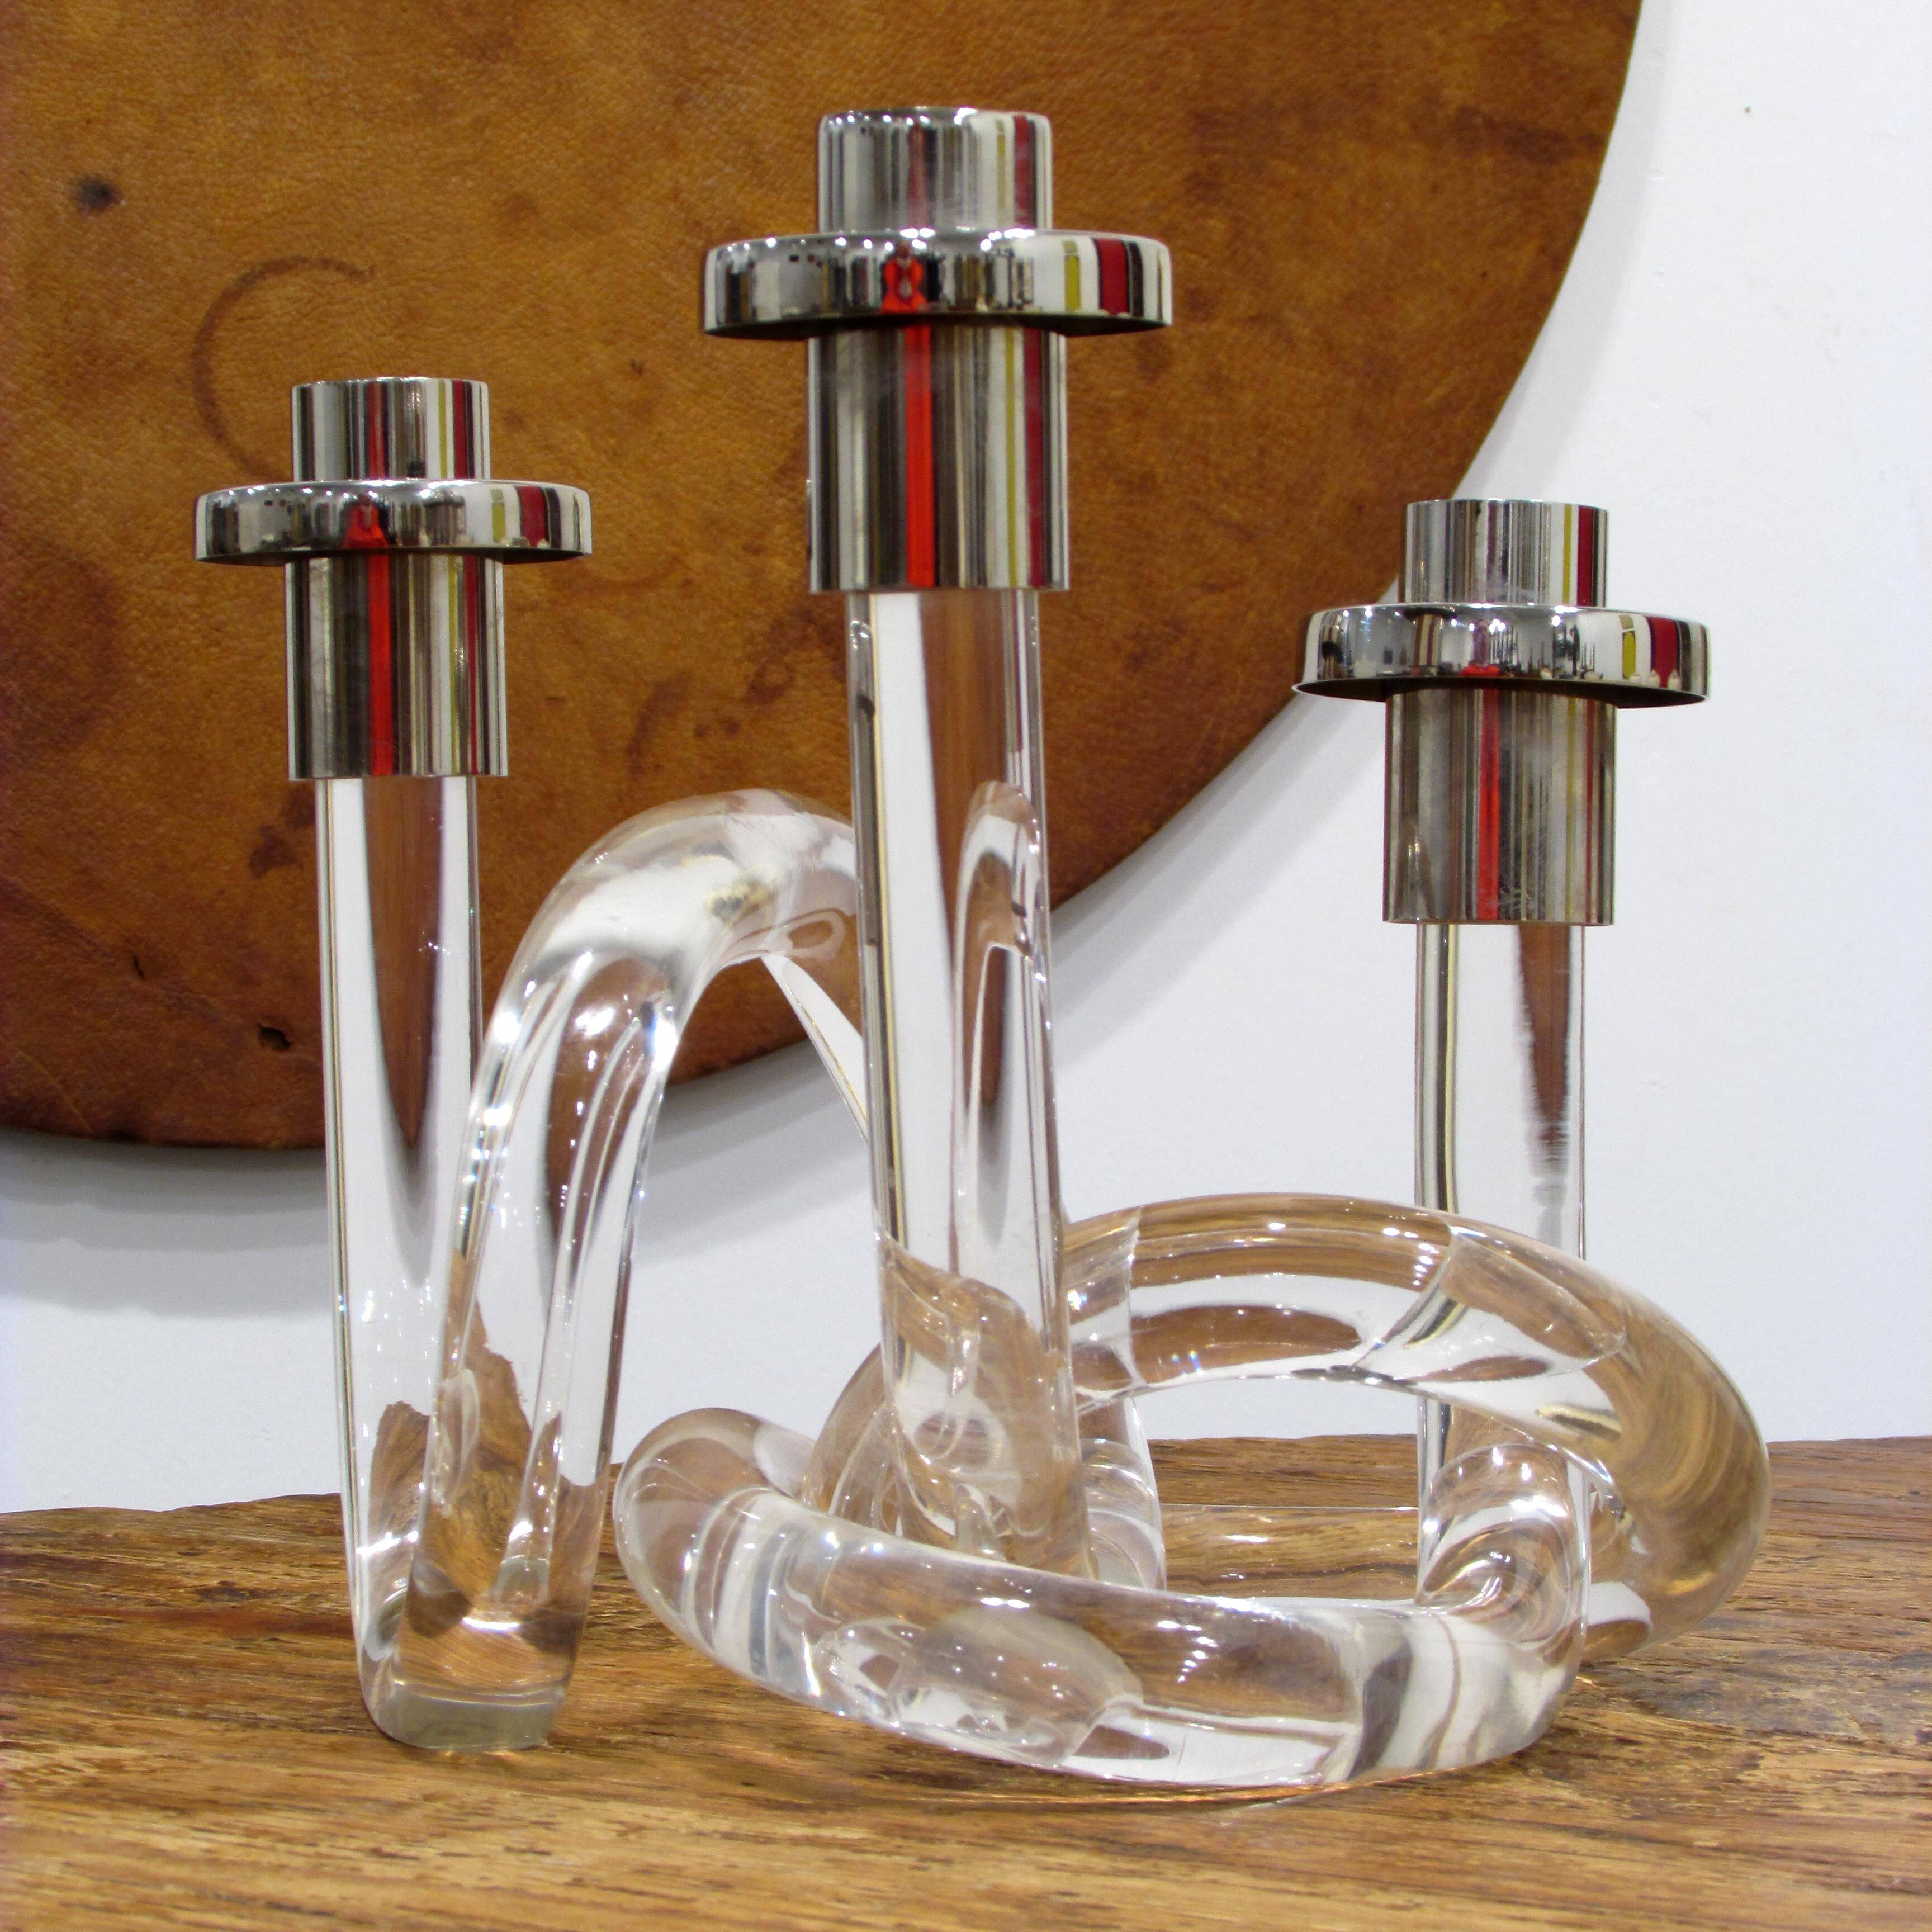 Intriguing two pieces of interlocking Lucite with three nickel-plated candleholders.